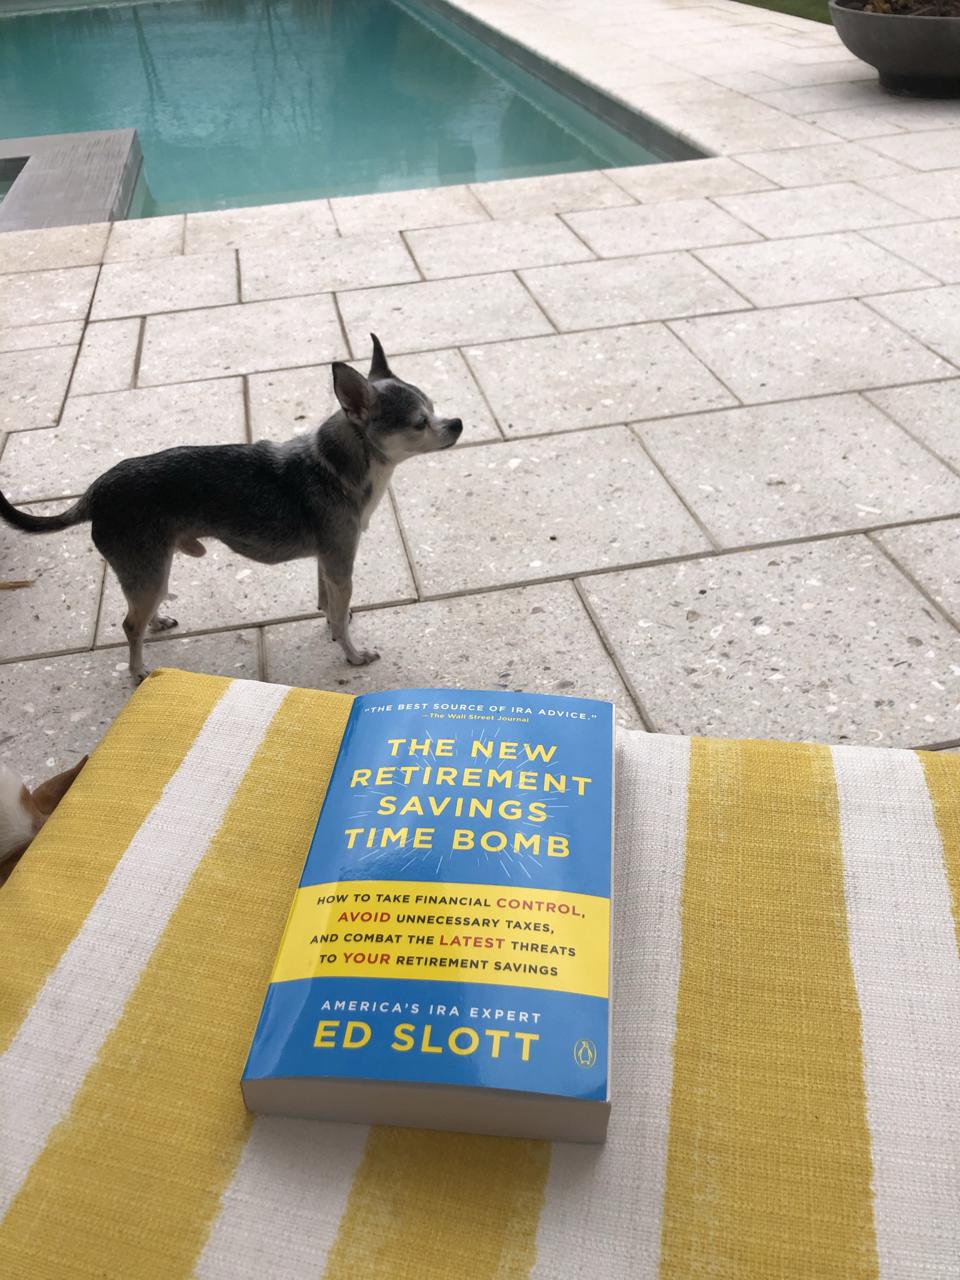 Chihuahua by pool and the book The New Retirement savings Time Bomb